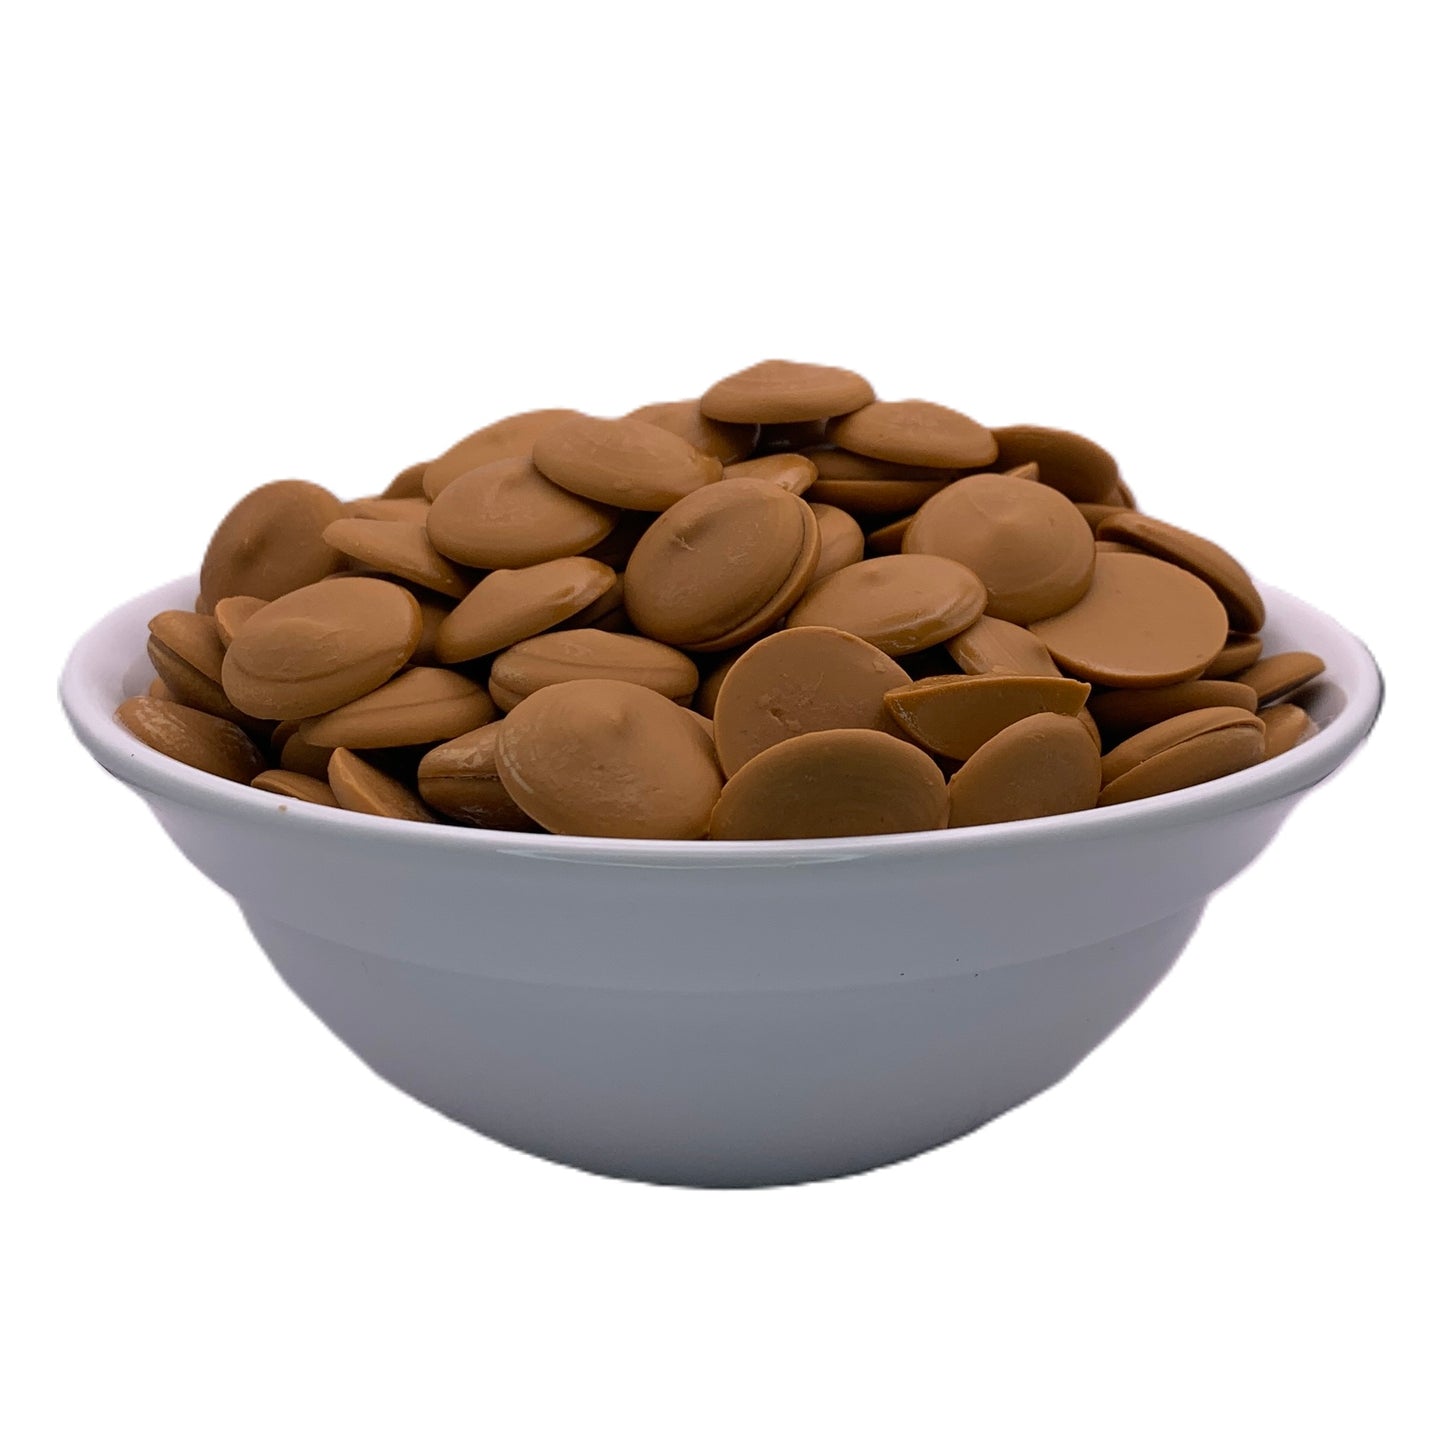 A white bowl containing Clasen peanut butter flavored chocolate melting wafers, the front view highlighting their tan color and smooth, melt-in-your-mouth texture.